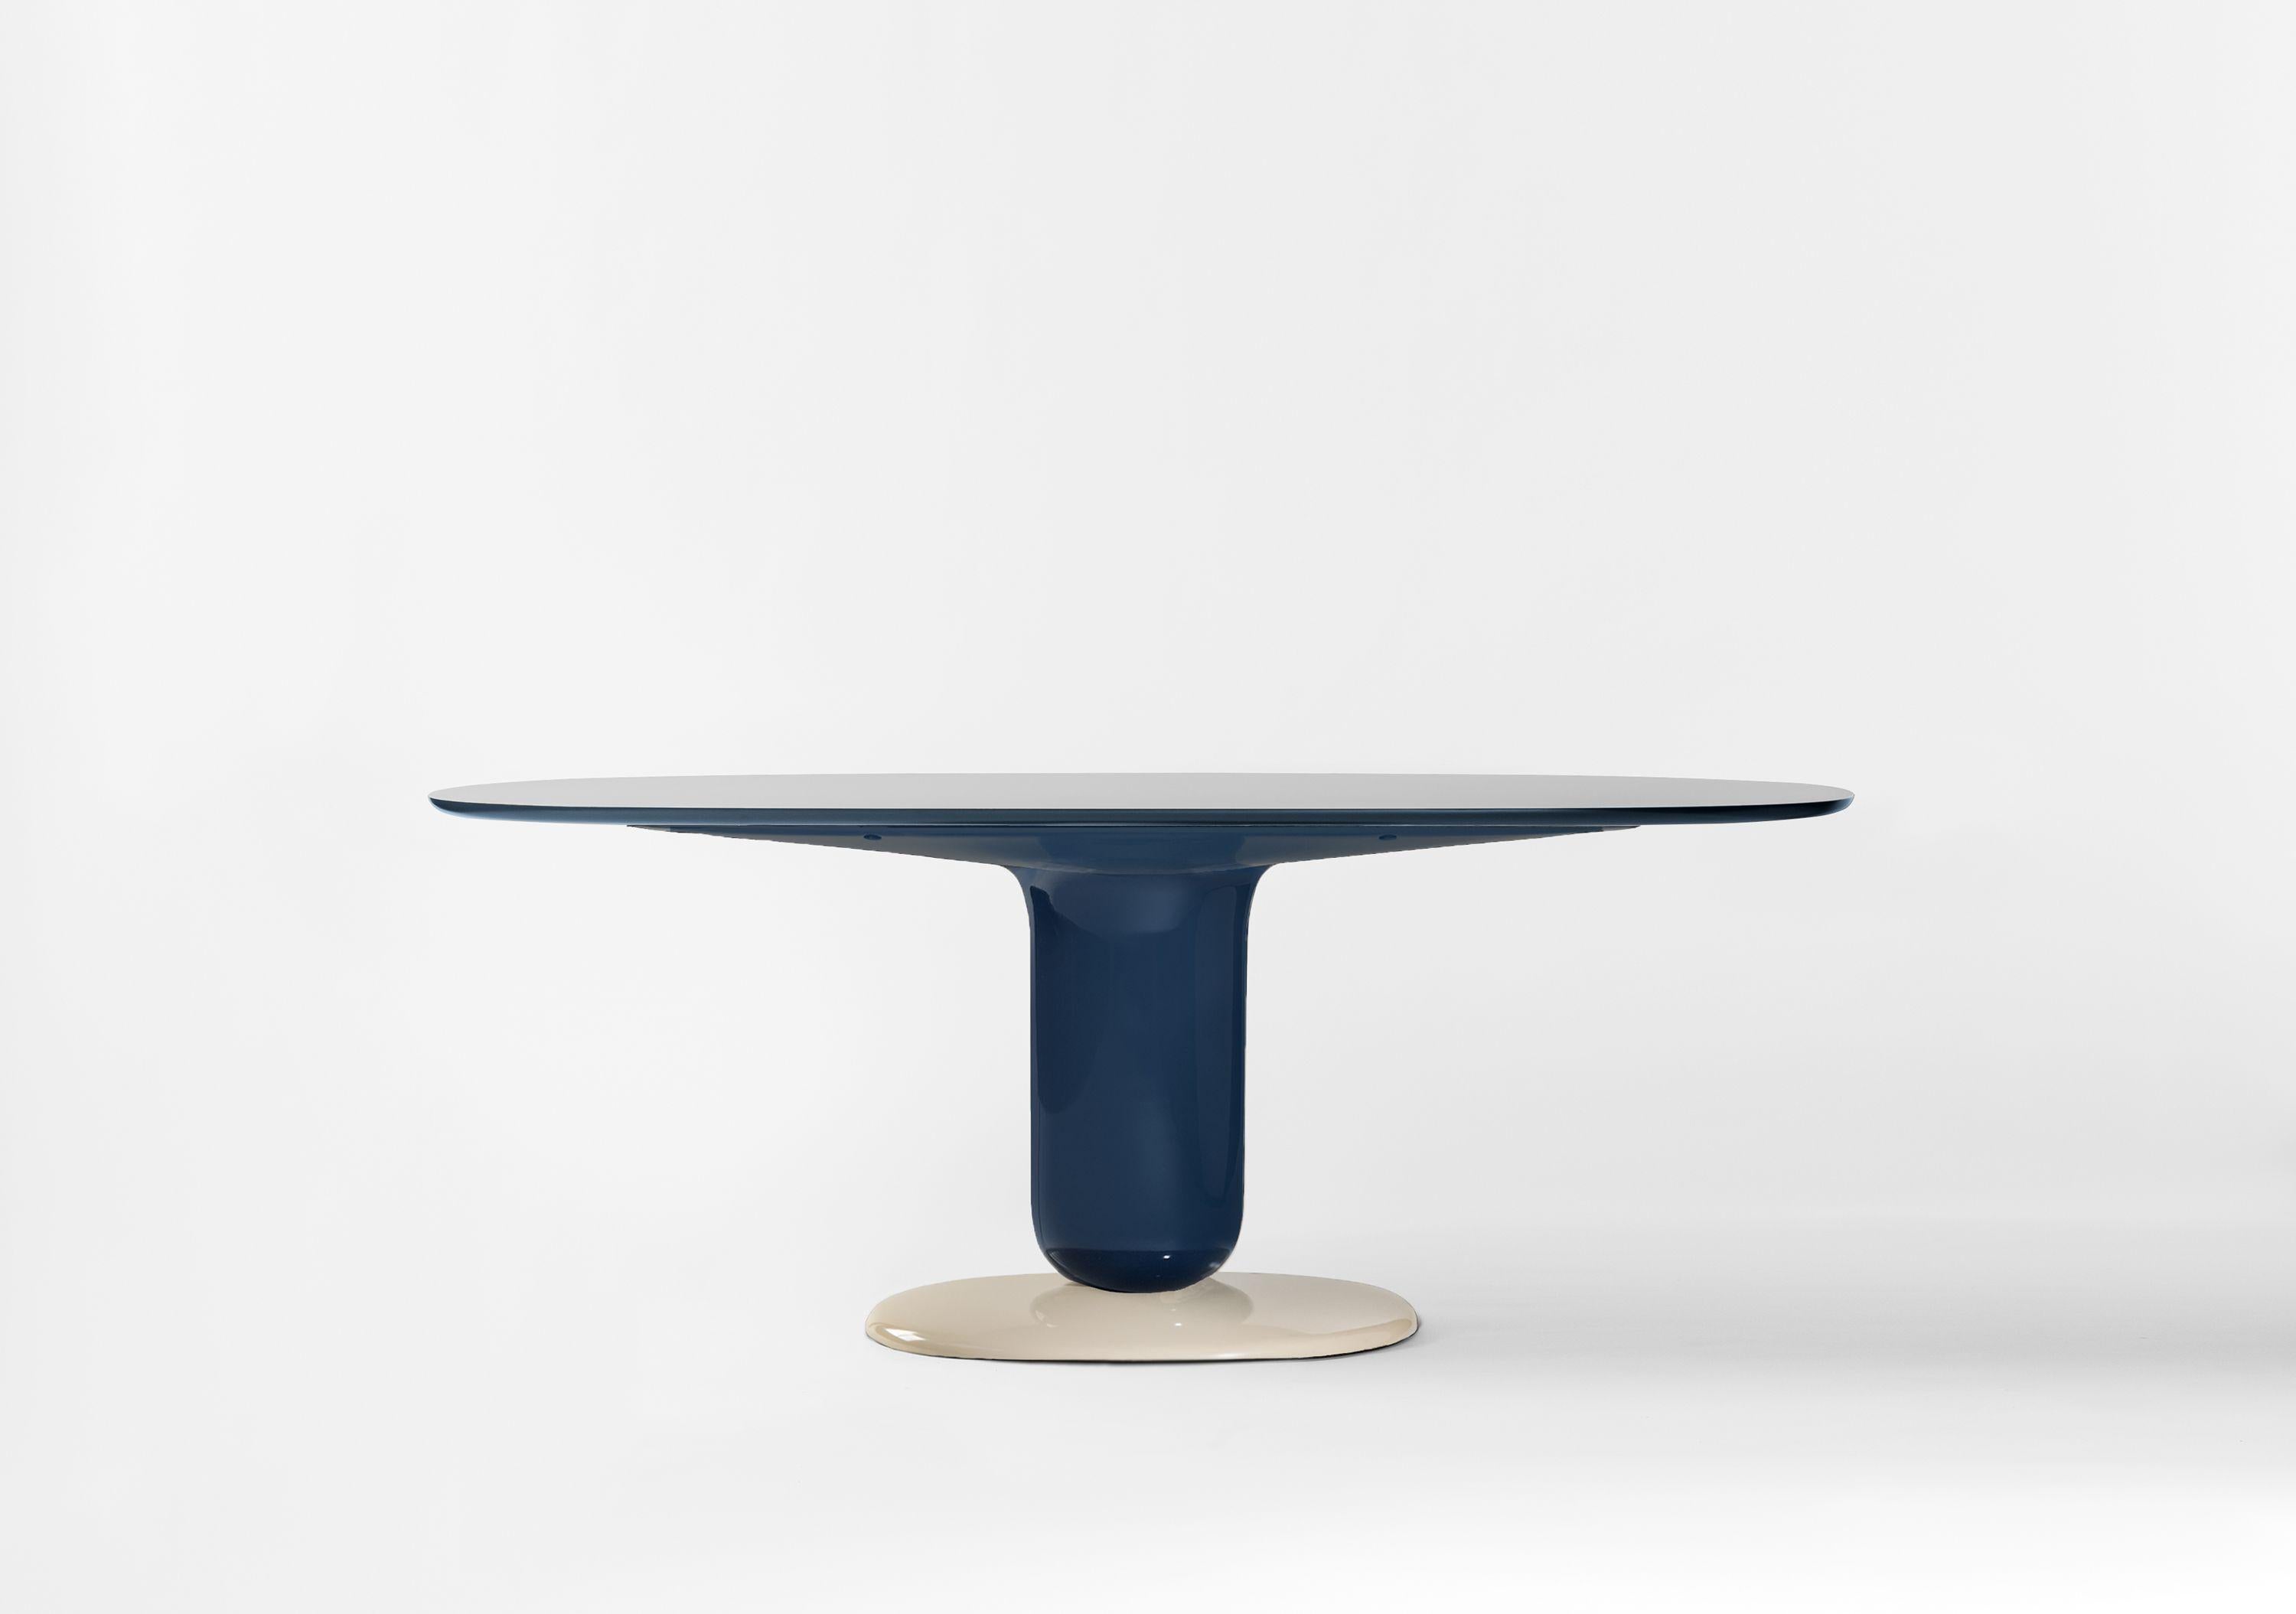 Multicolor Blue 190 dining table

Design in 2021 by Jaime Hayon added to the Explorer collection that started in 2019.
Manufactured by BD Barcelona.

As a continuation of the playful Explorer Table series and following its elegant beauty, we